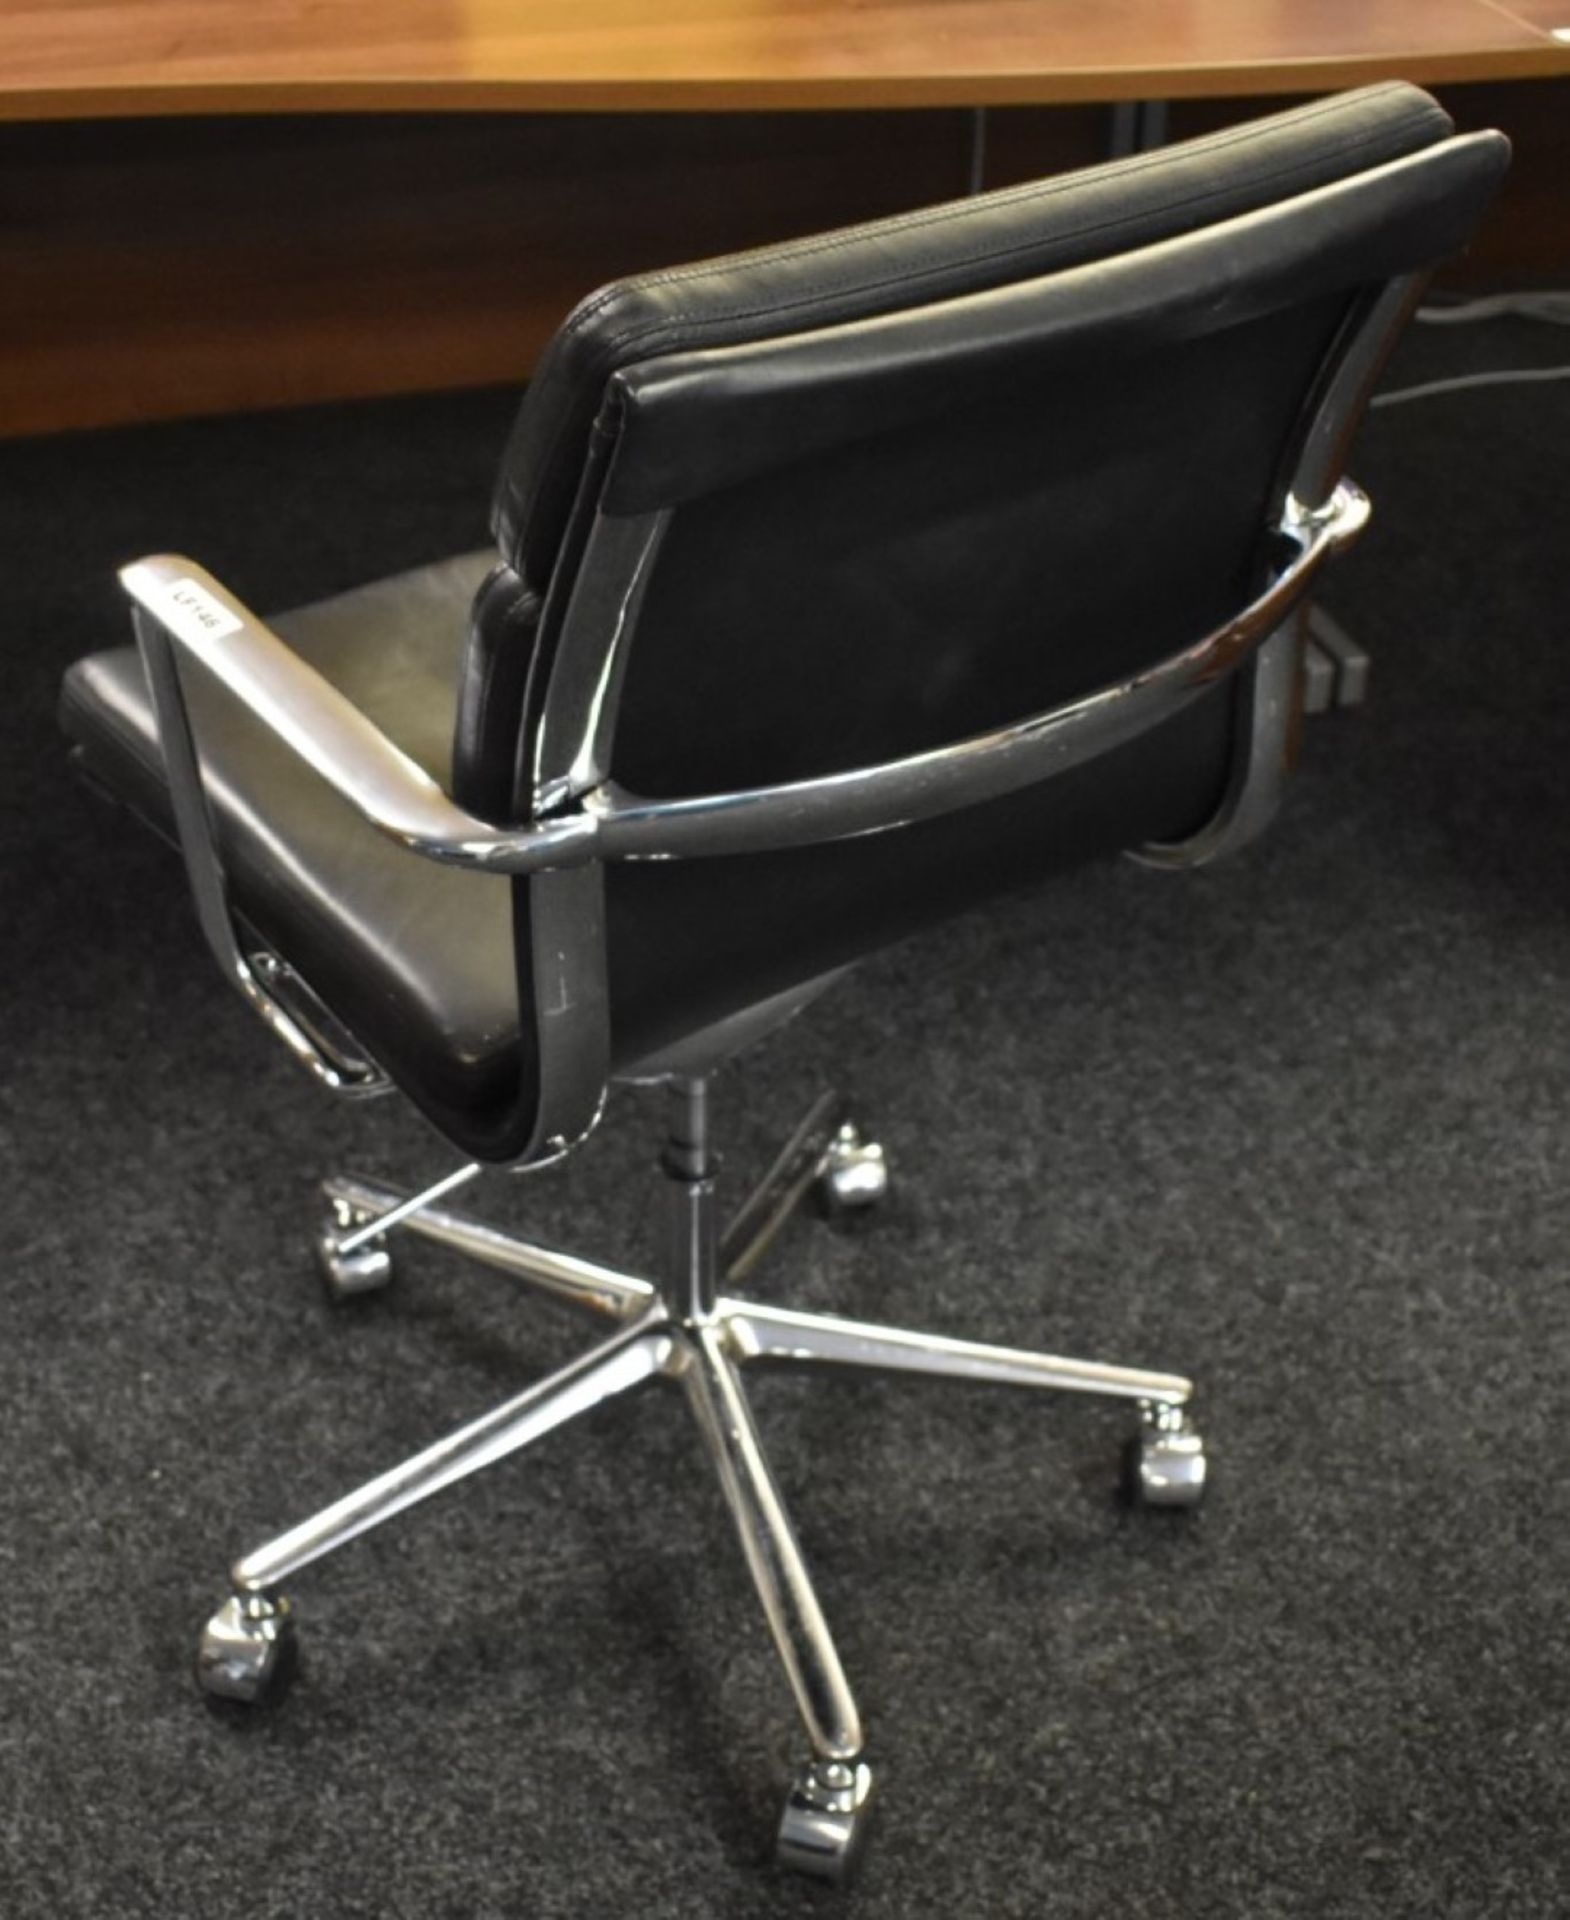 1 x Eames Inspired Office Chair - Swivel Office Chair Upholstered in Black Leather - Image 7 of 7